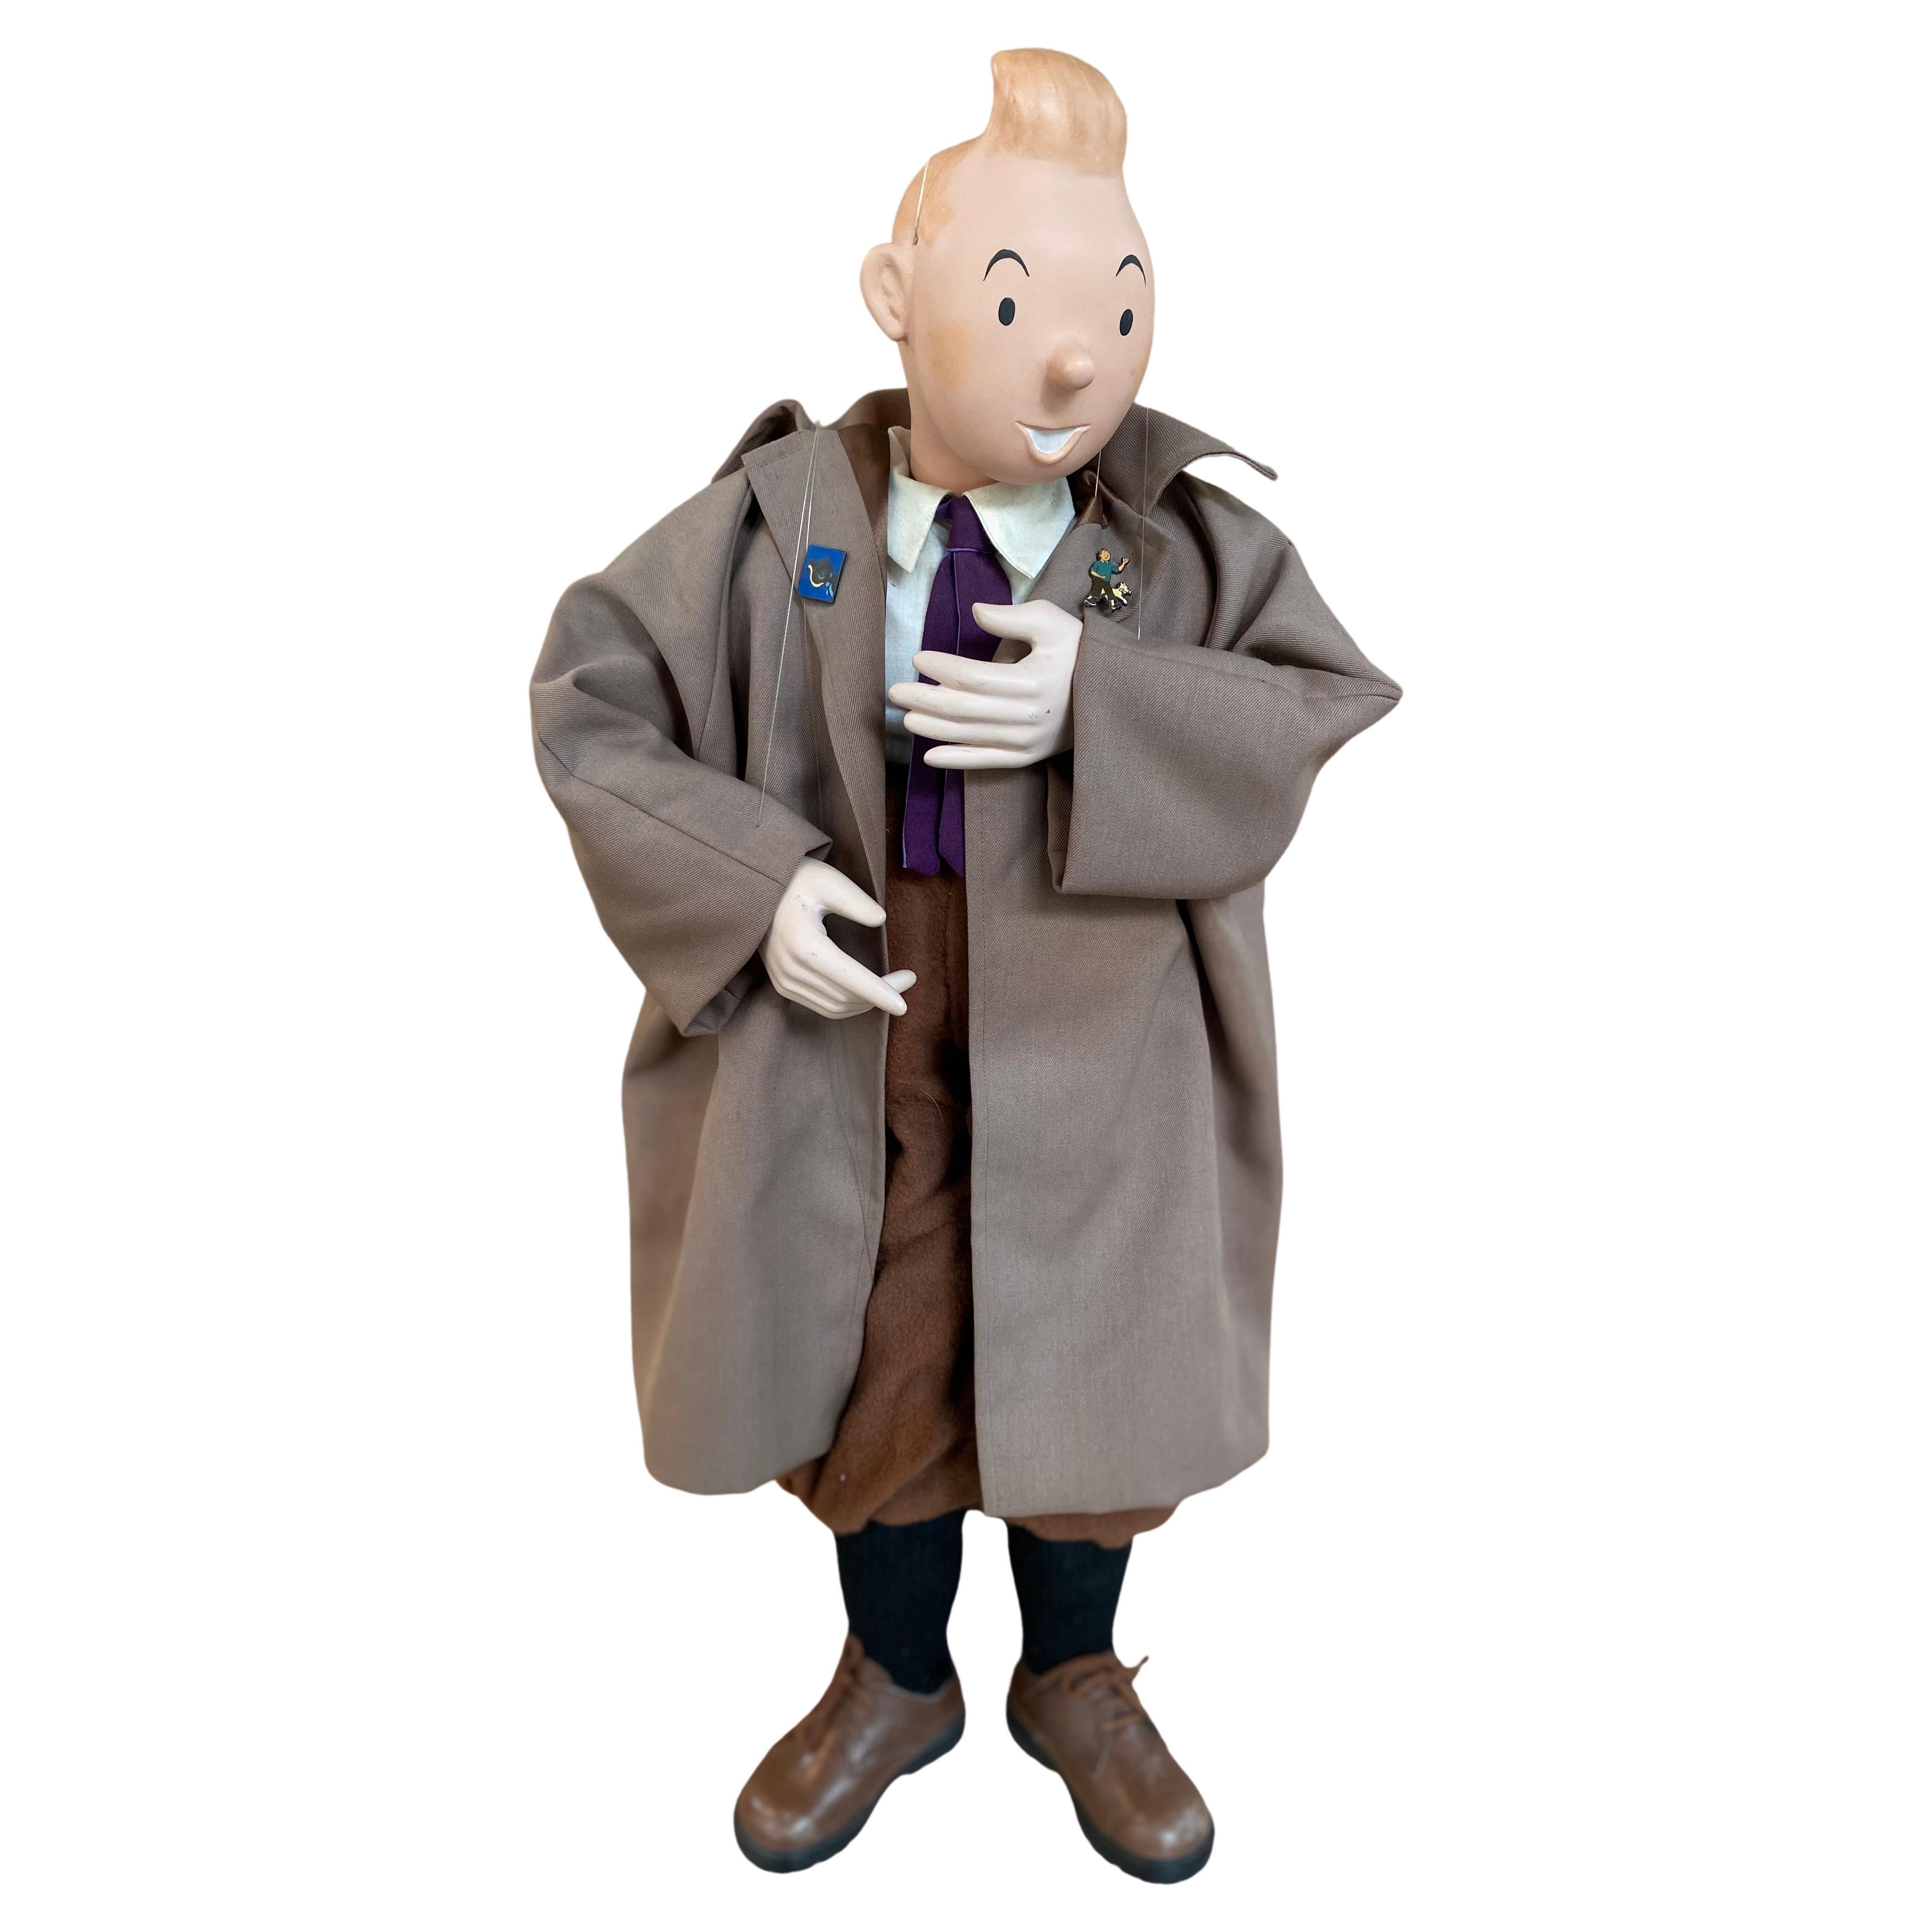 Very Rare Tintin Puppet Hergé, Georges Remi Dit